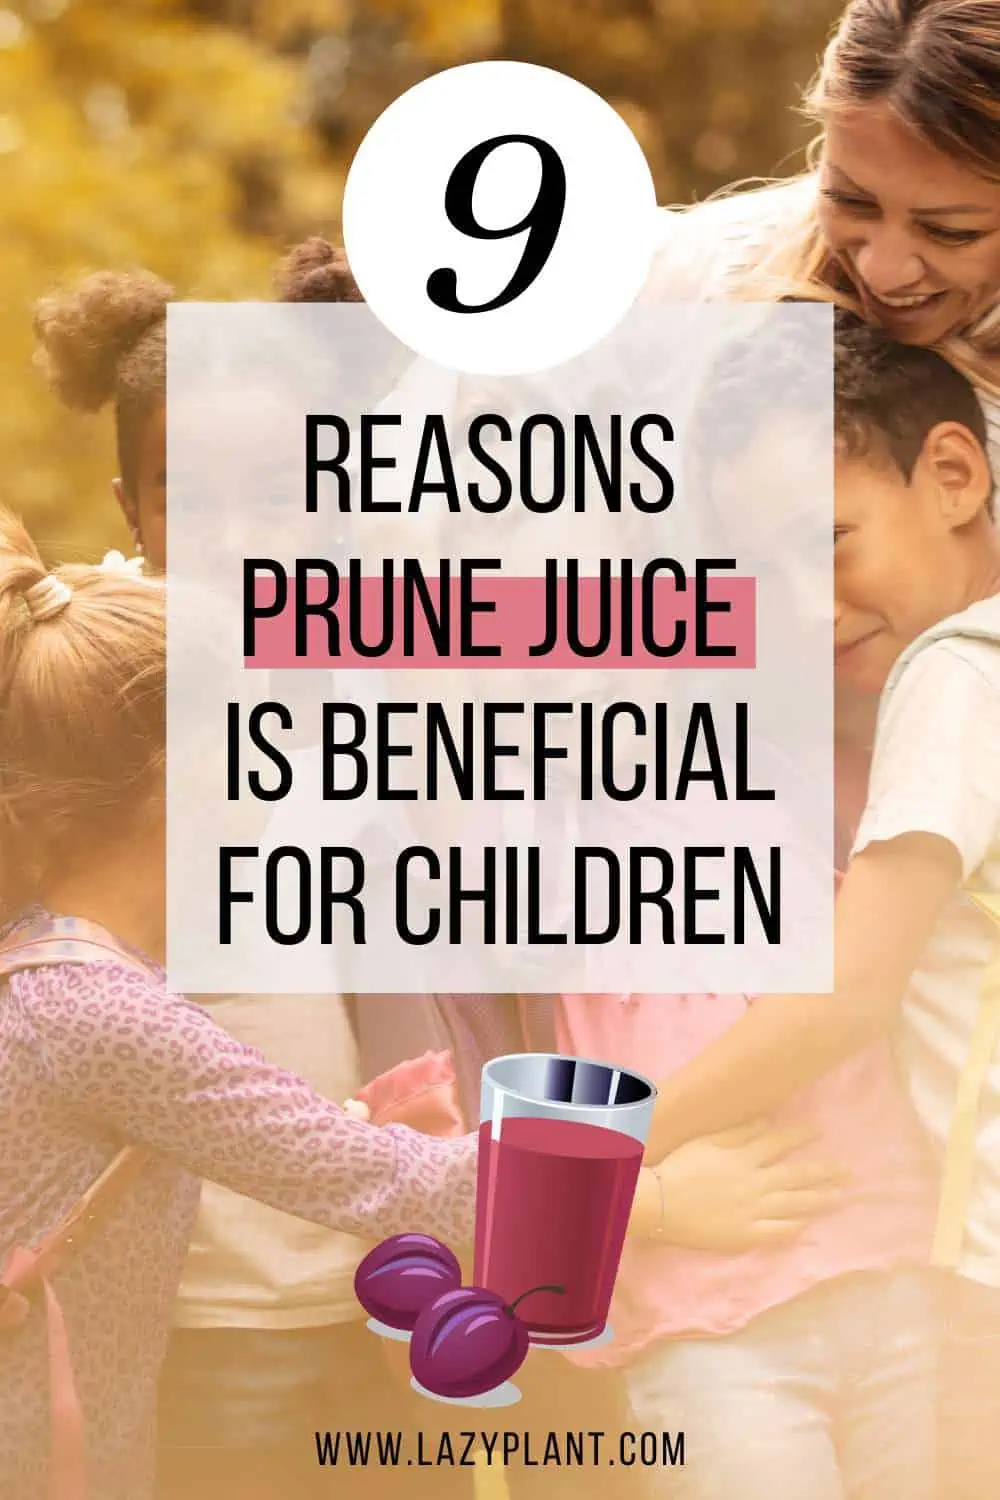 Why should toddlers and older kids drink prune juice?